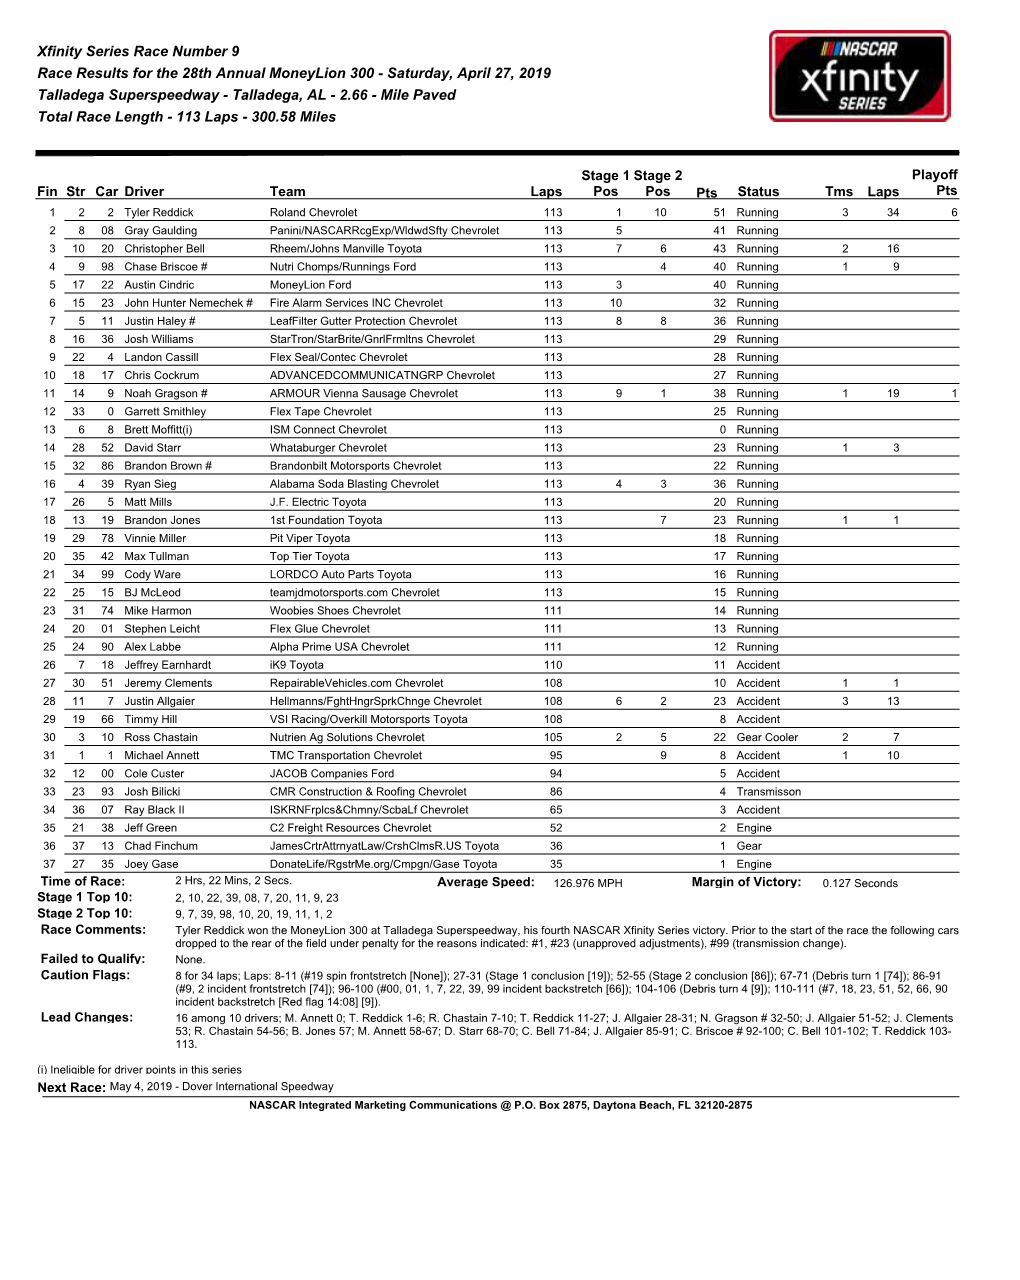 Xfinity Series Race Number 9 Race Results For